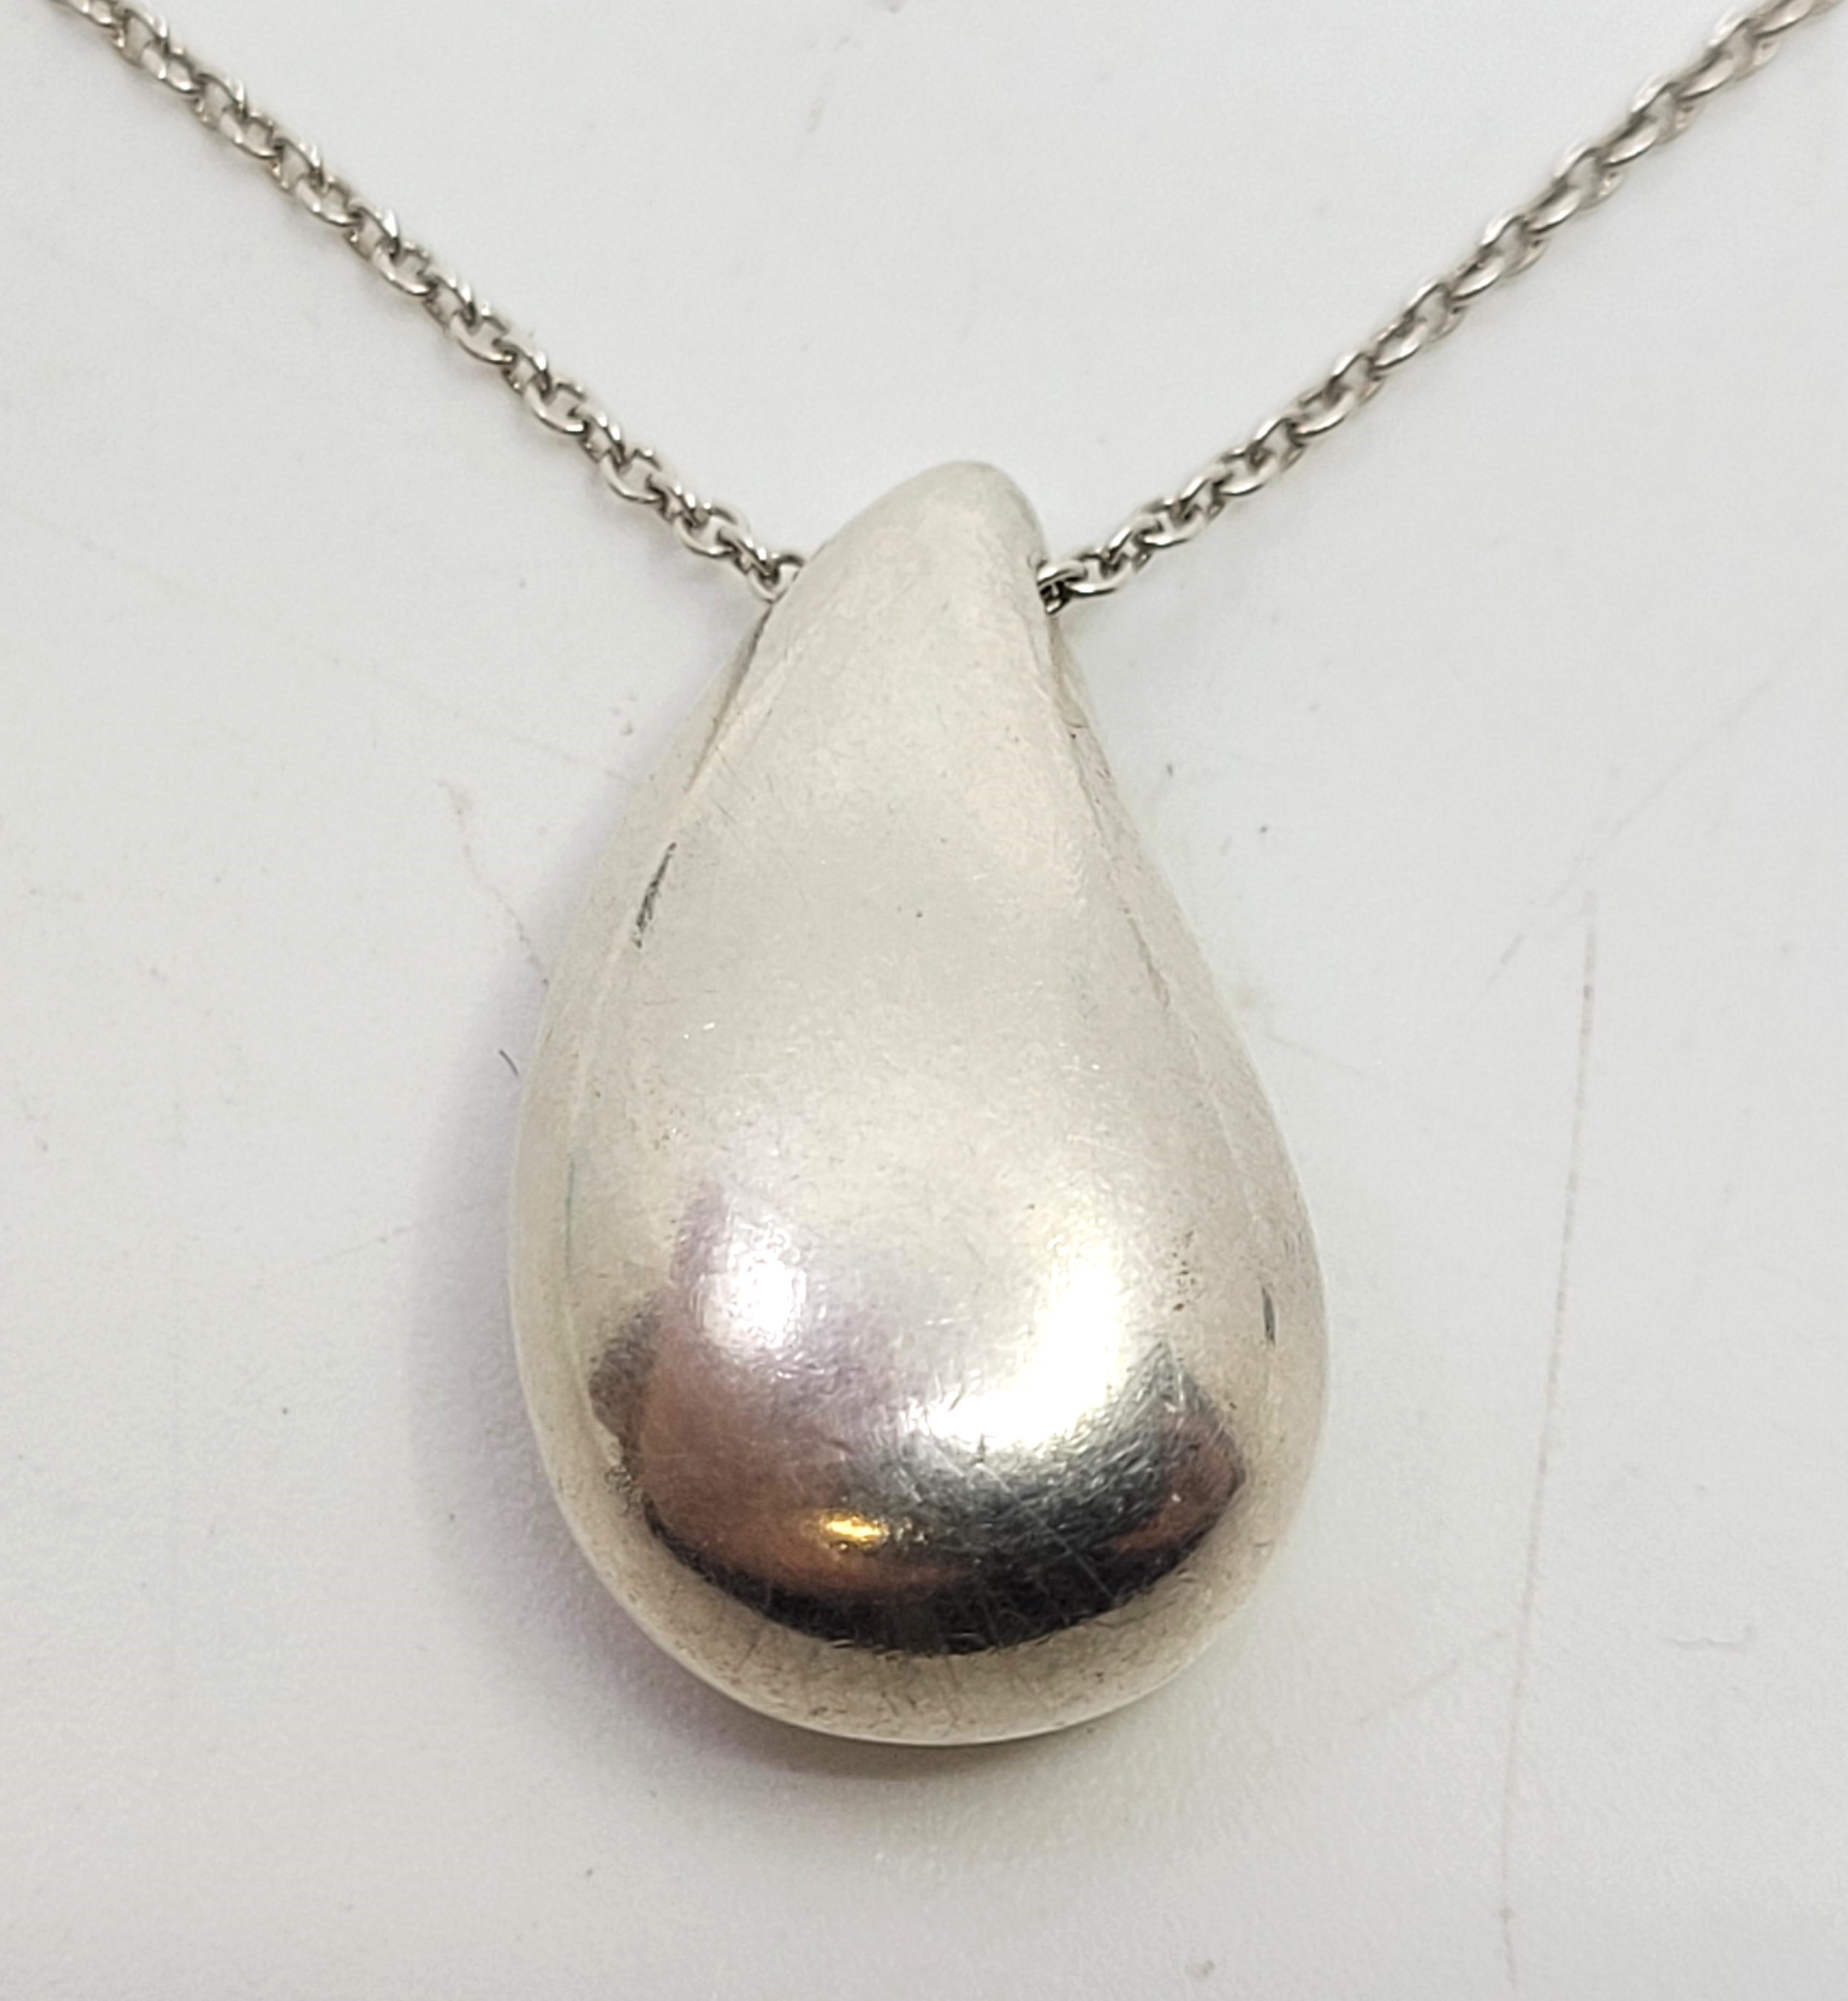 An Elsa Peretti for Tiffany & Co. sterling silver teardrop pendant necklace, height 21mm, to 46. - Image 6 of 12